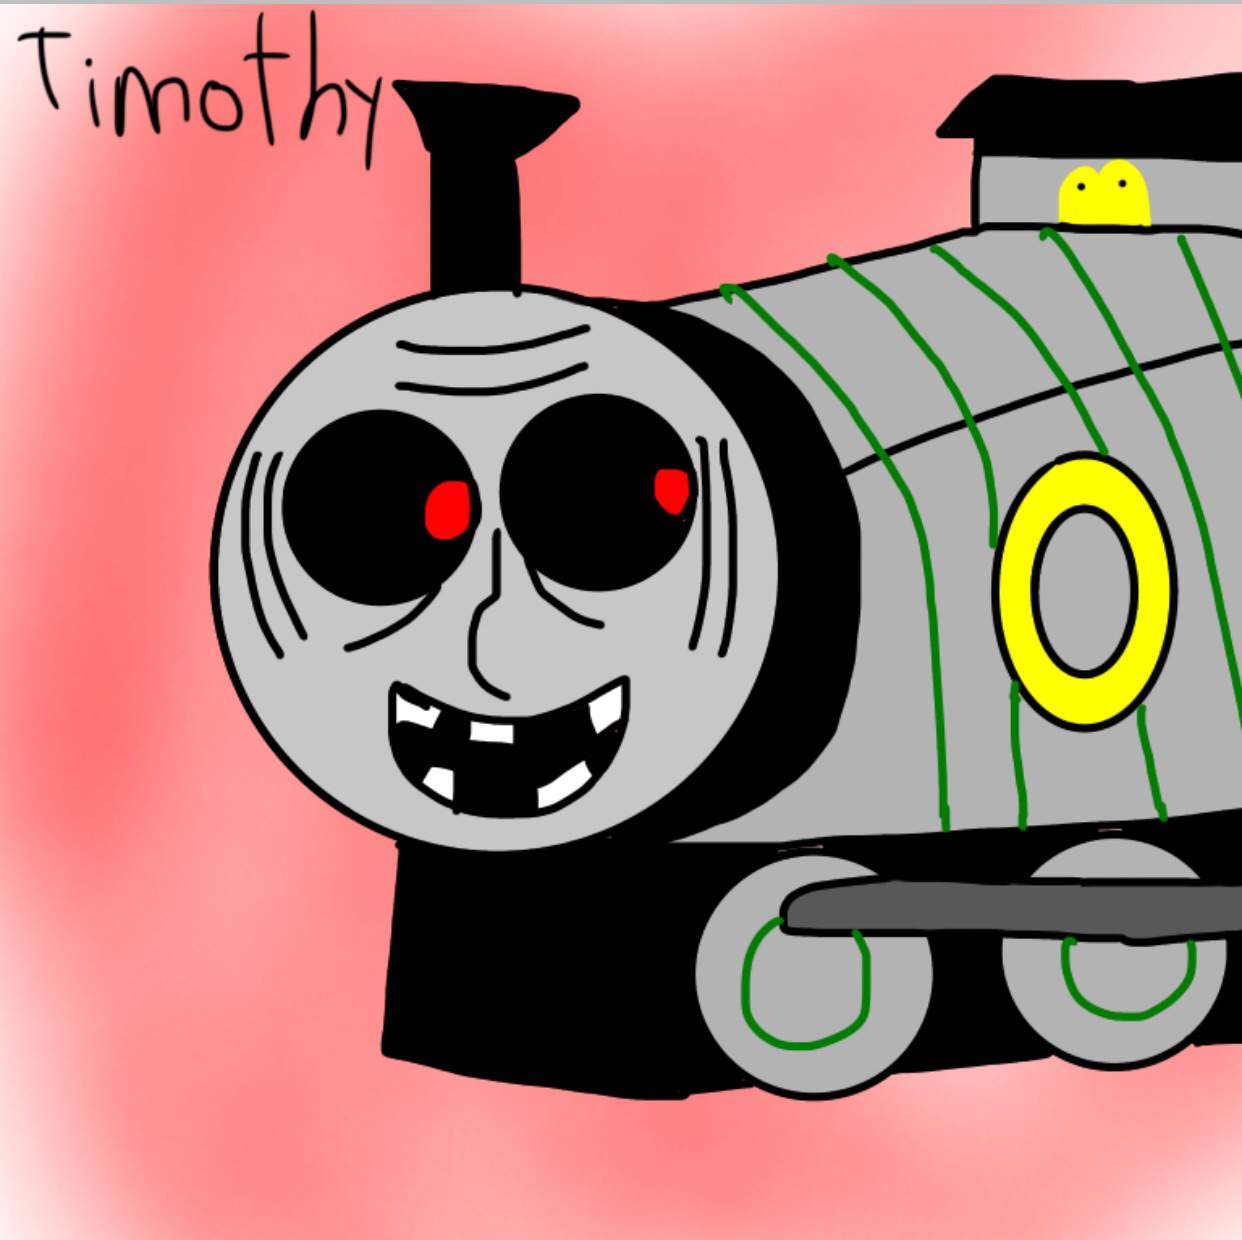 thomas and friends timothy